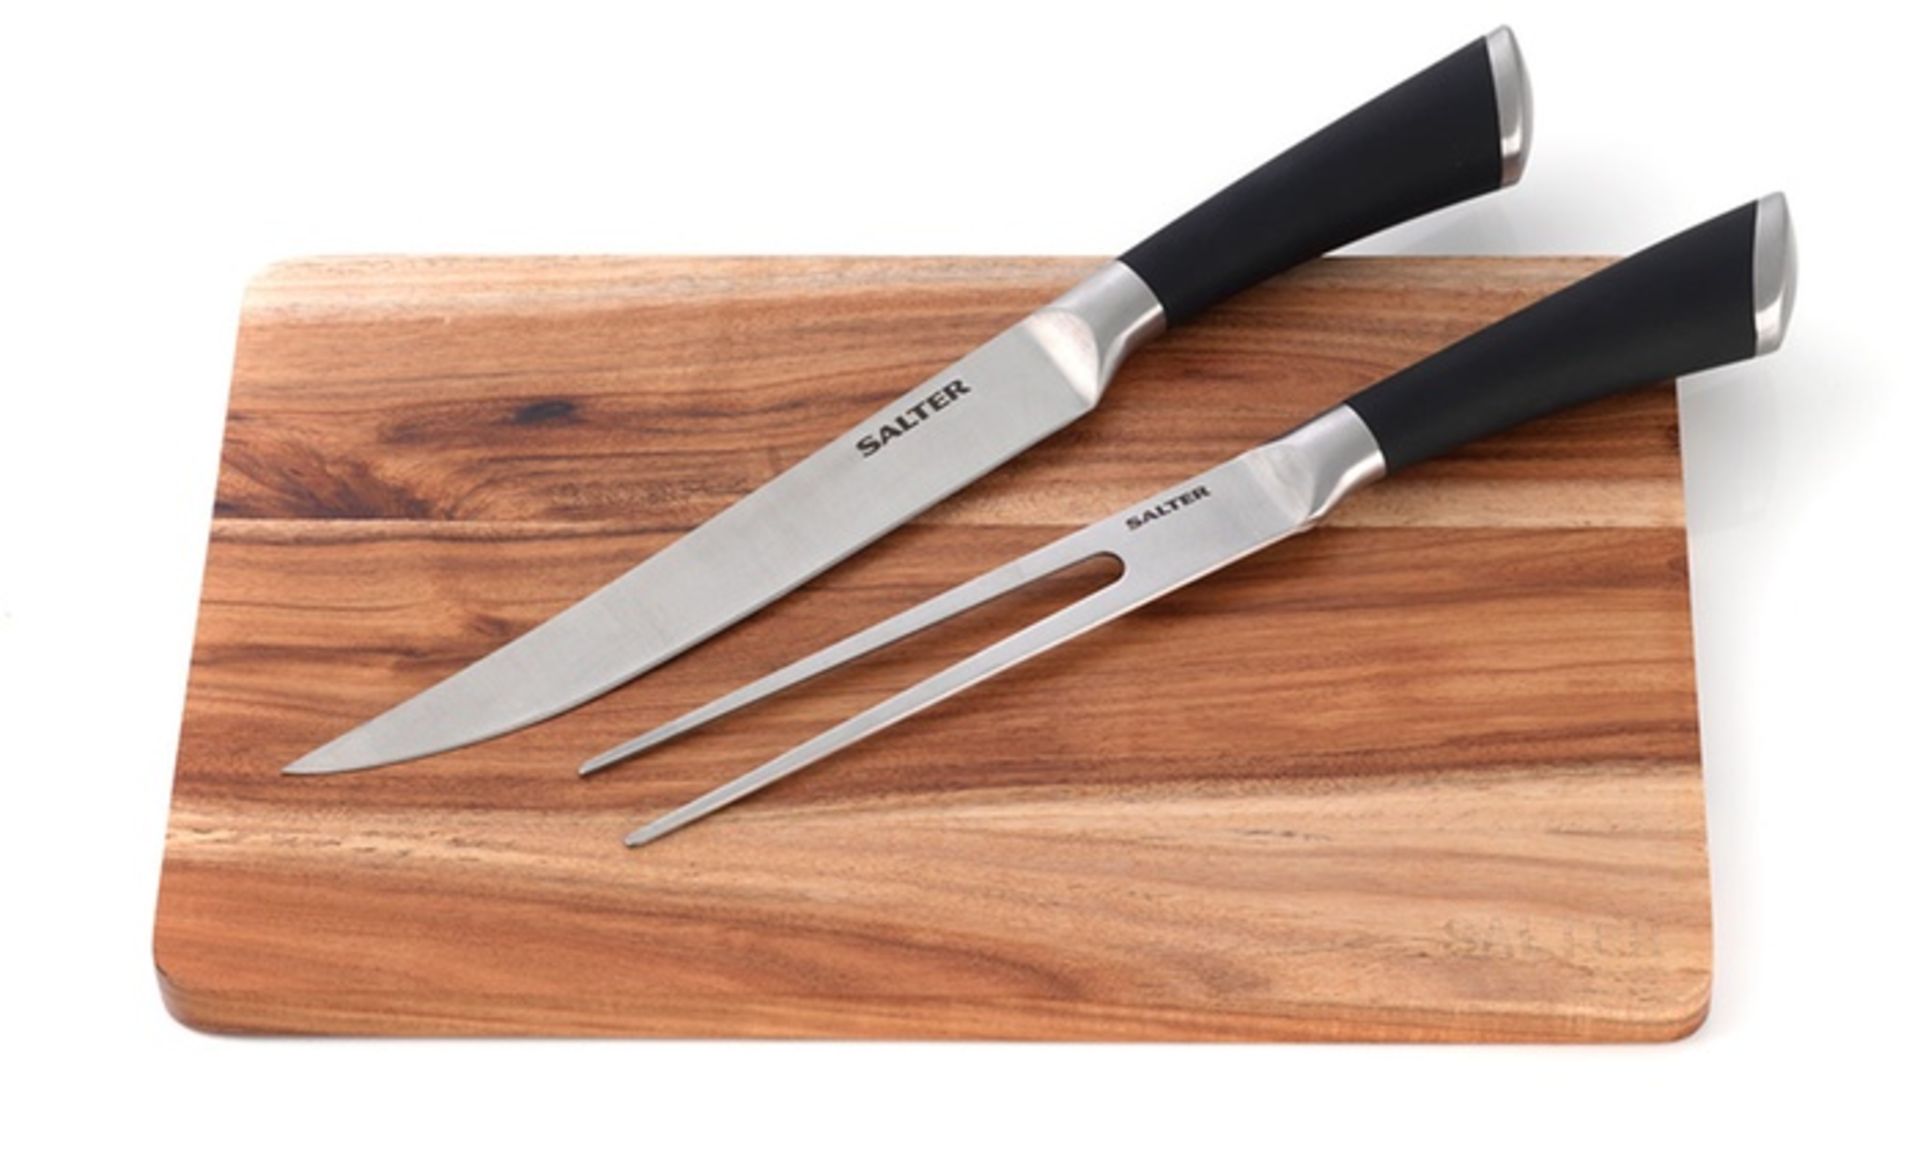 V Brand New Salter Elegance Carving Knife And Fork With Chopping Board ISP £46.99 (Mahahome.com) X 2